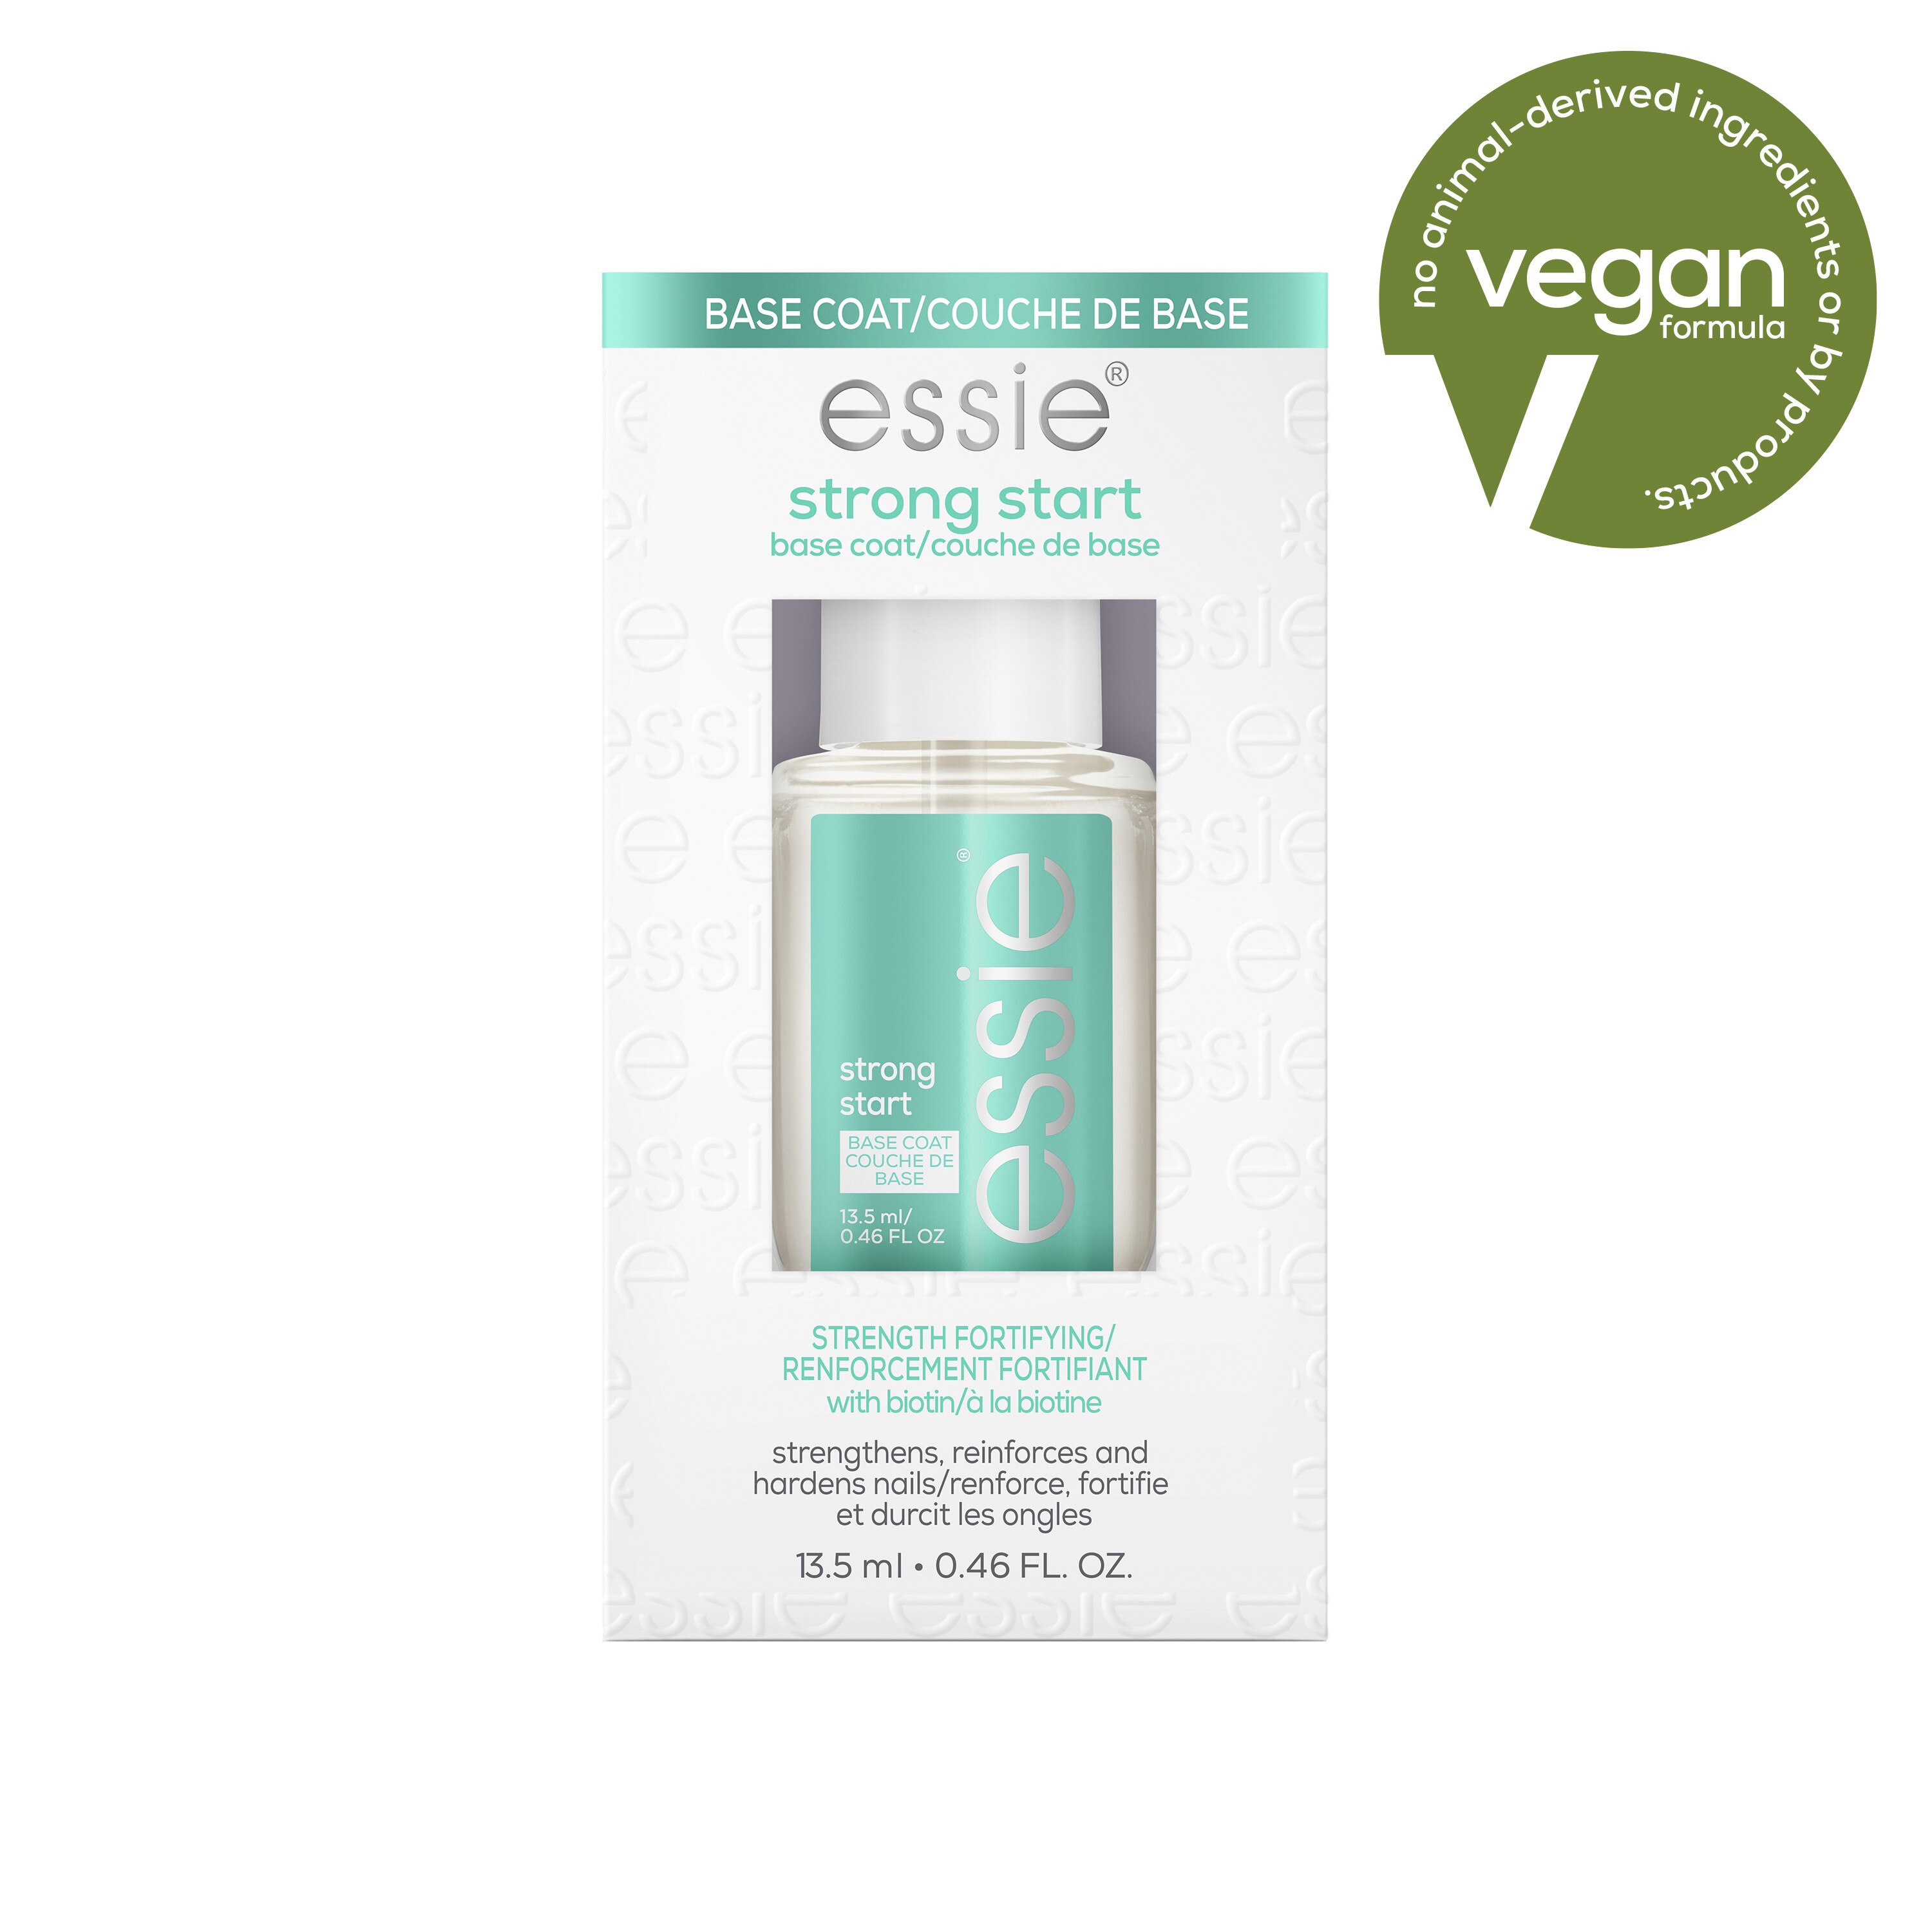 essie Salon-Quality Nail Care, Vegan, strong star clear base coat + strengthener